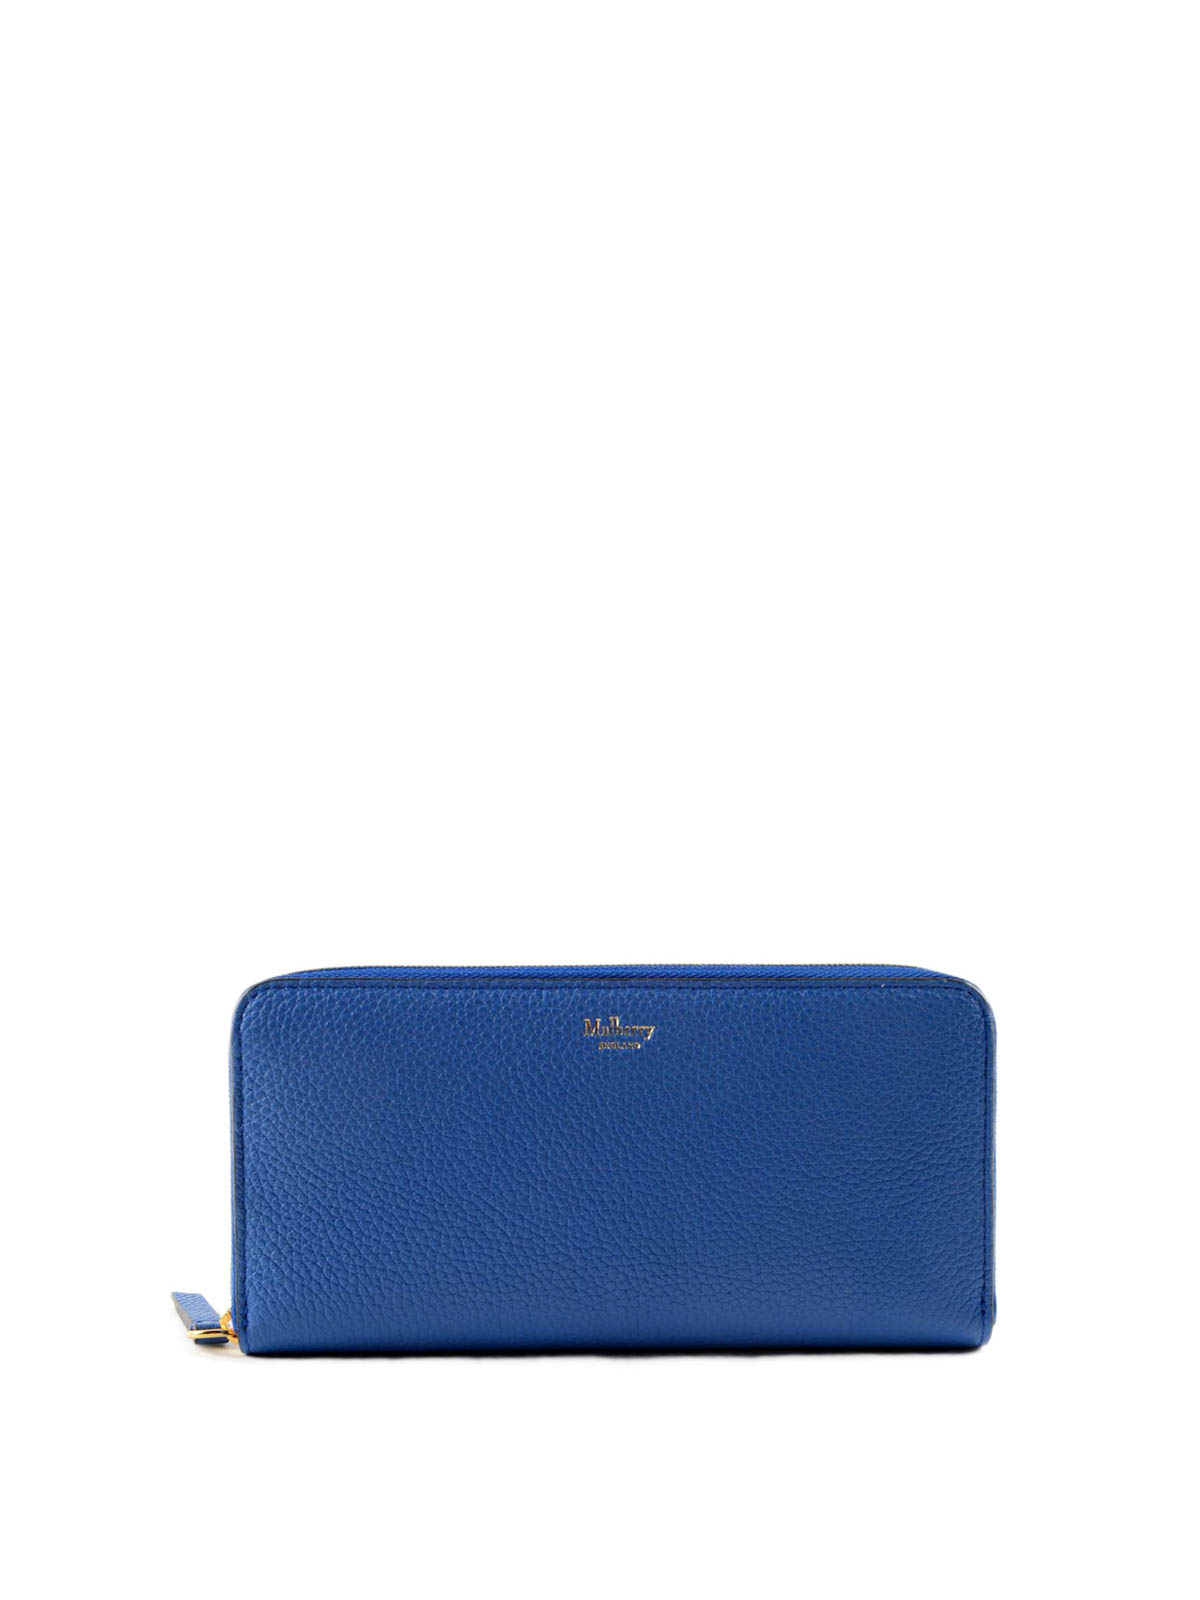 Mulberry Steel Blue Small Bayswater Tote